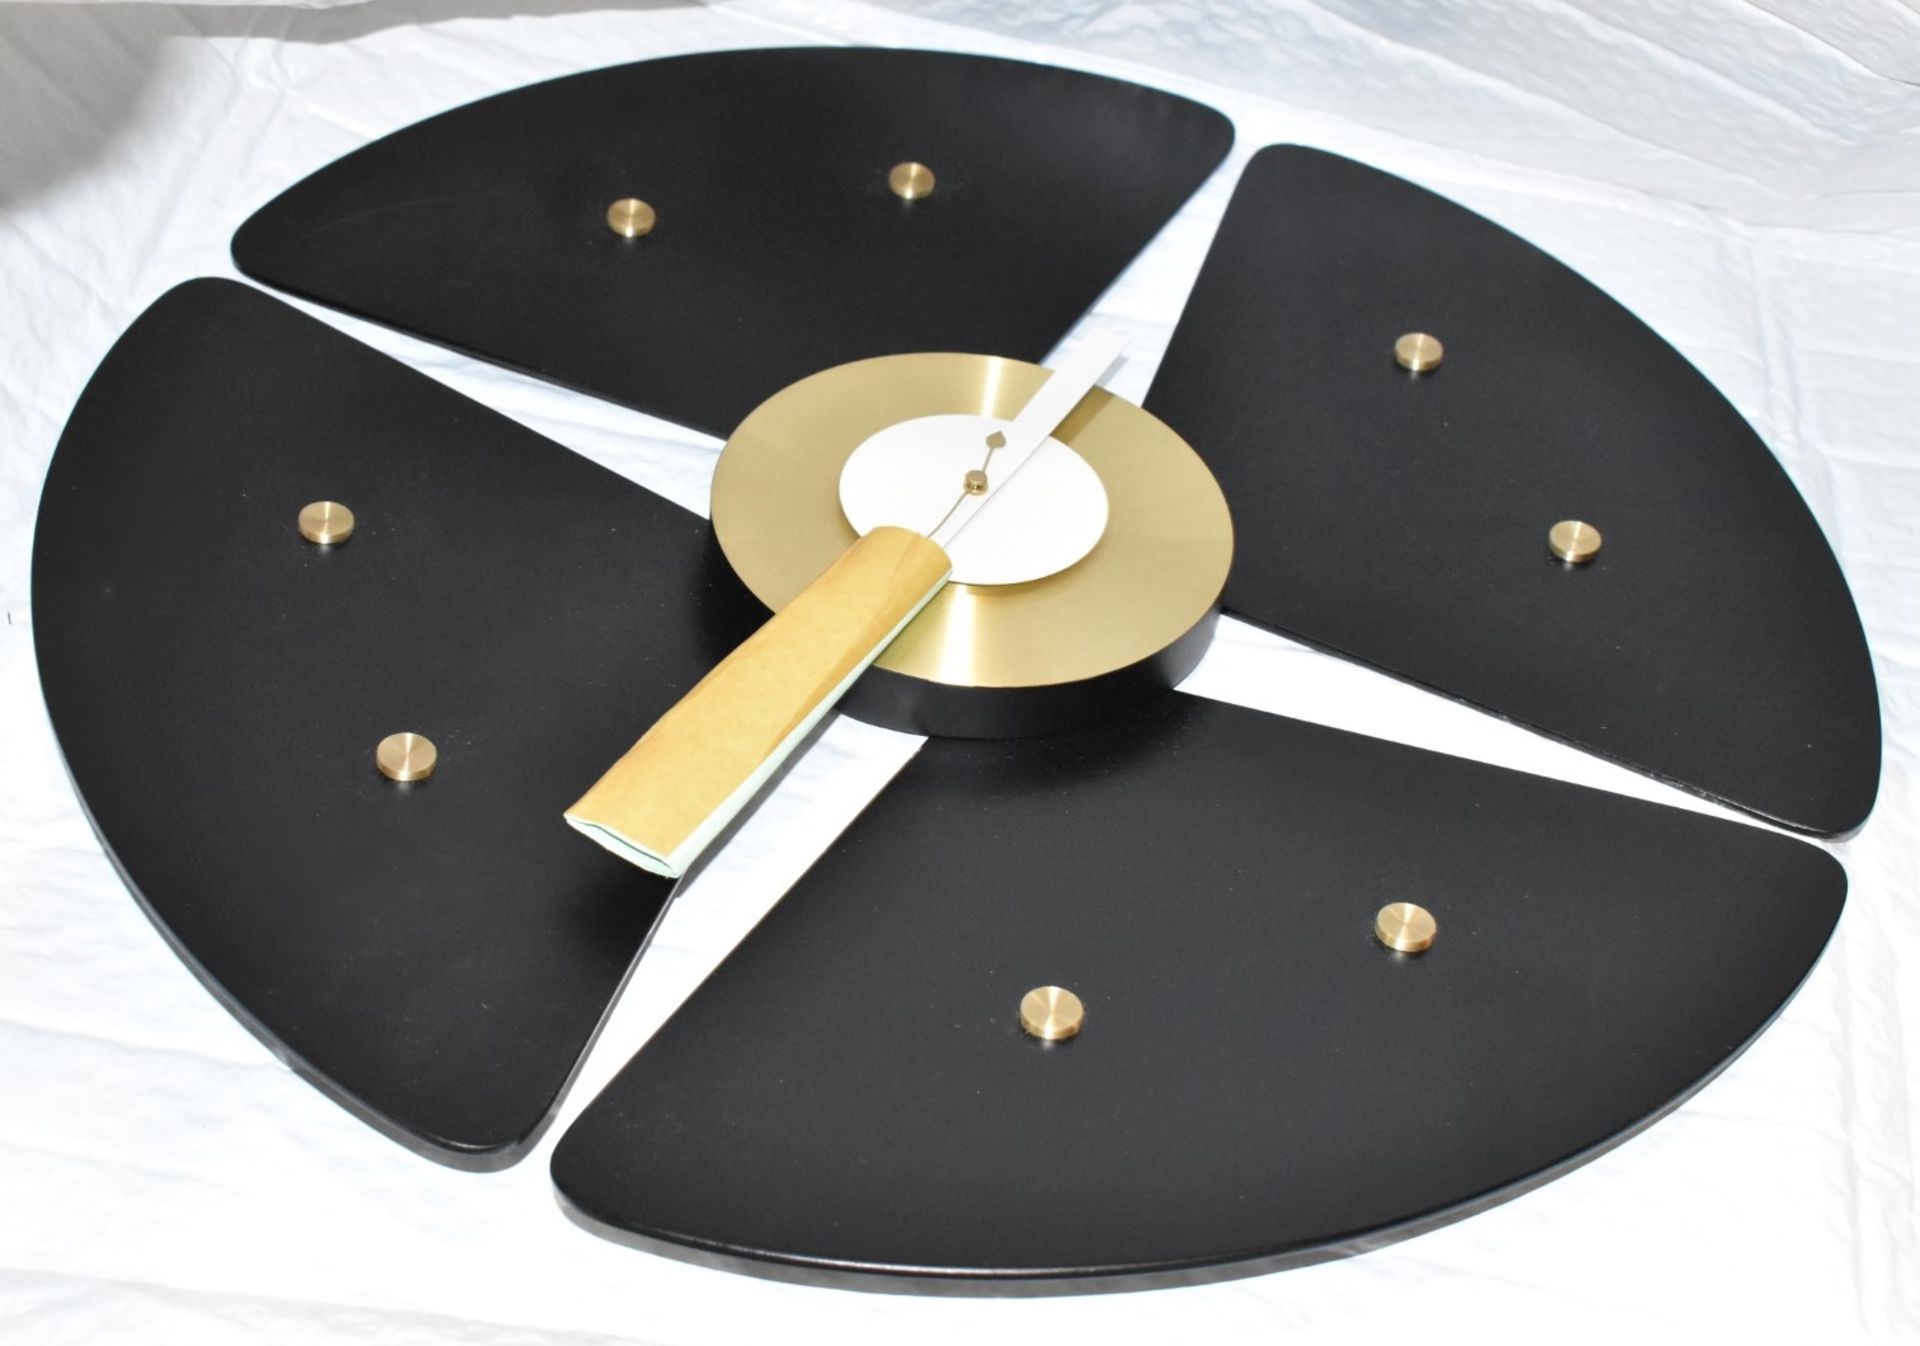 1 x VITRA George Nelson 'Petal' Designer Wall Clock in Black and Brass - Original Price £389.00 - Image 4 of 5